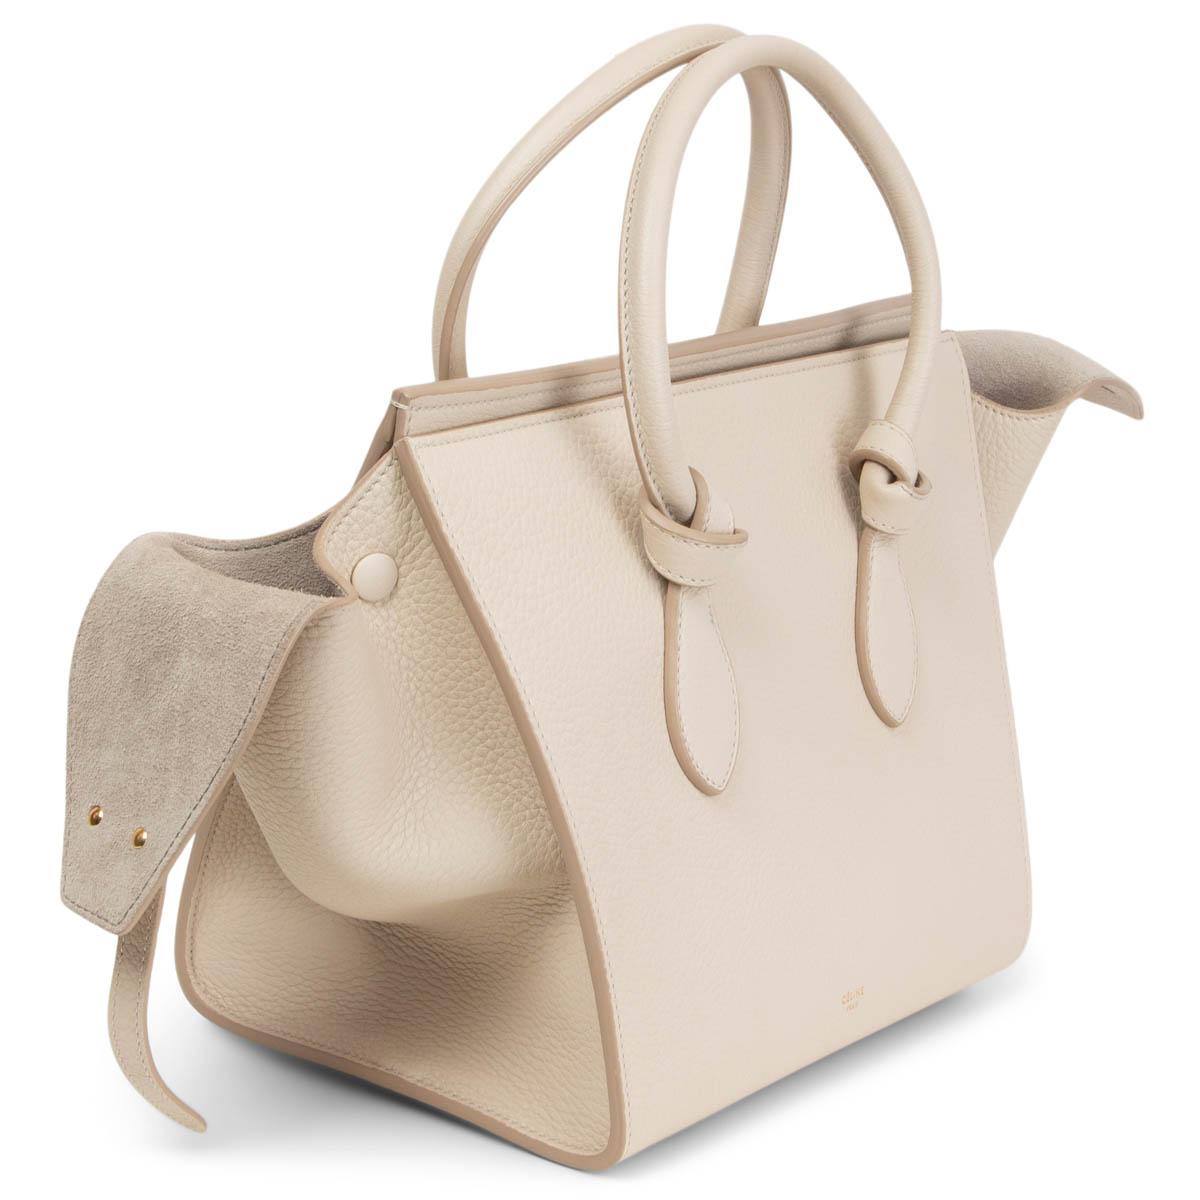 100% authentic Céline Small Tie Knot handbag in pale light grey grained calfskin. Lined in light grey suede with one zipper pocket and two slip pockets against the front. Has been carried and shows some faint marks on the lining. Inside pouchis